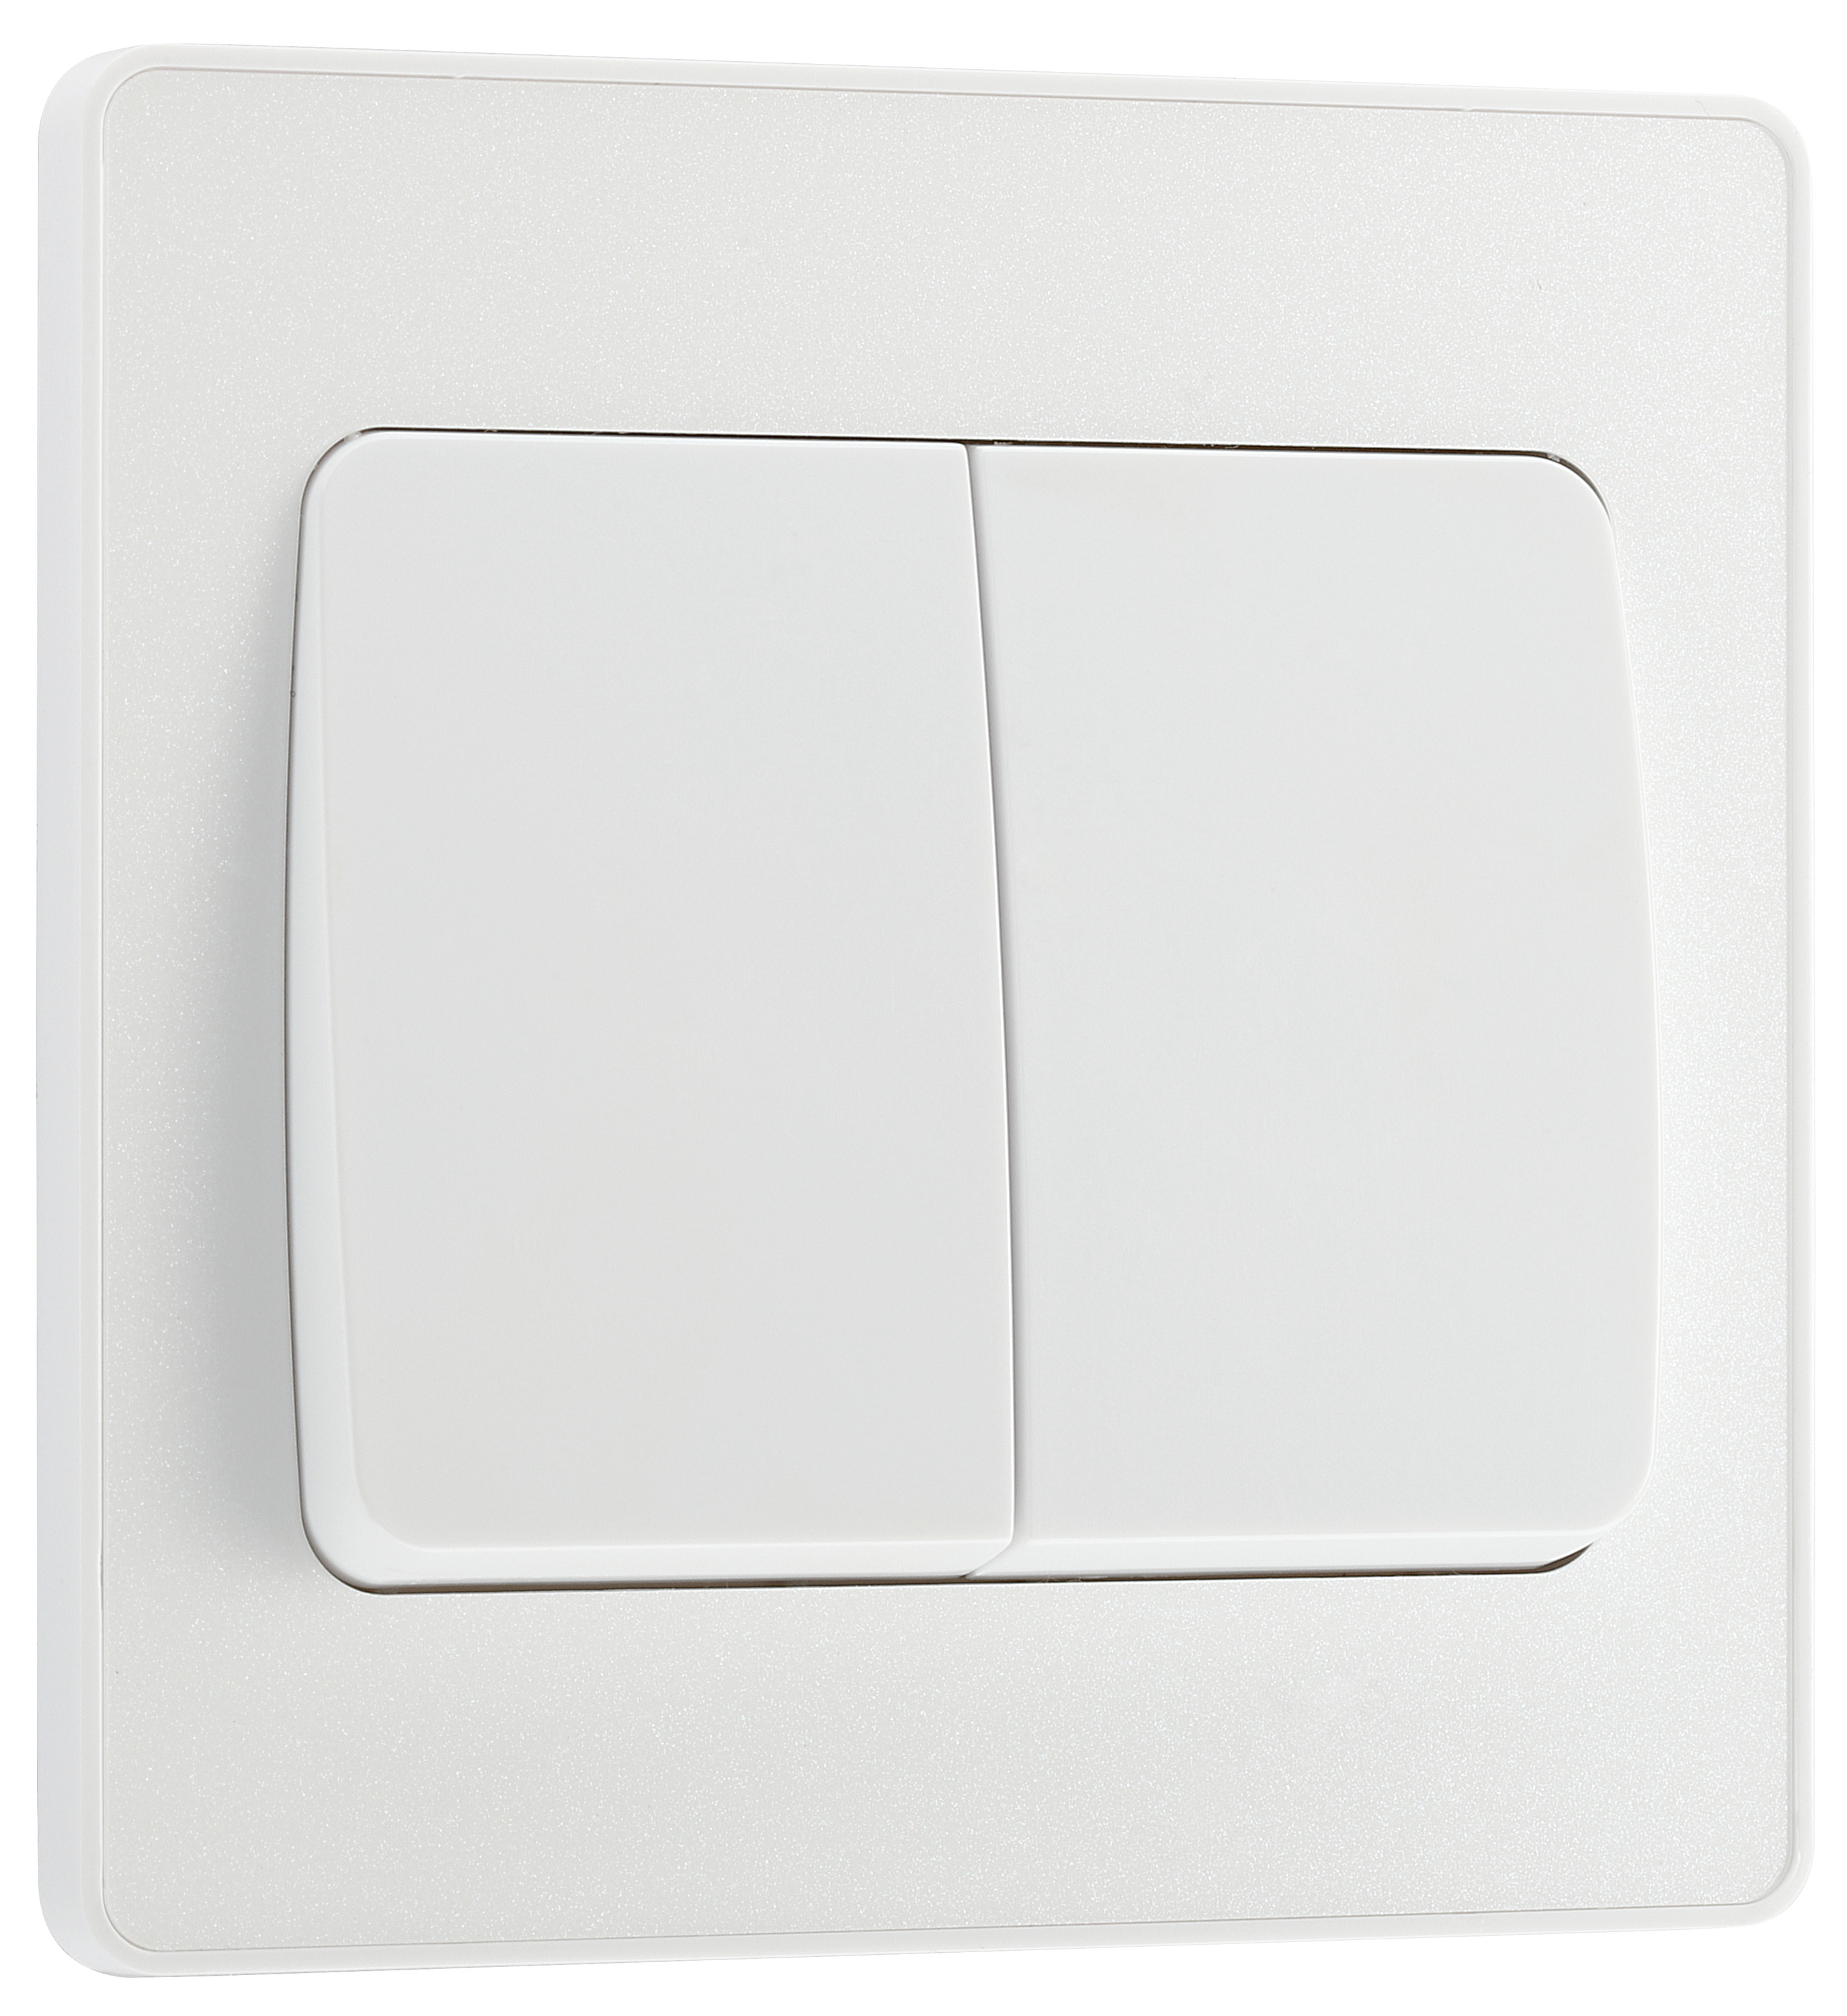 Image of BG Evolve Pearlescent White 20A 16Ax Wide Rocker Double Light Switch - 2 Way